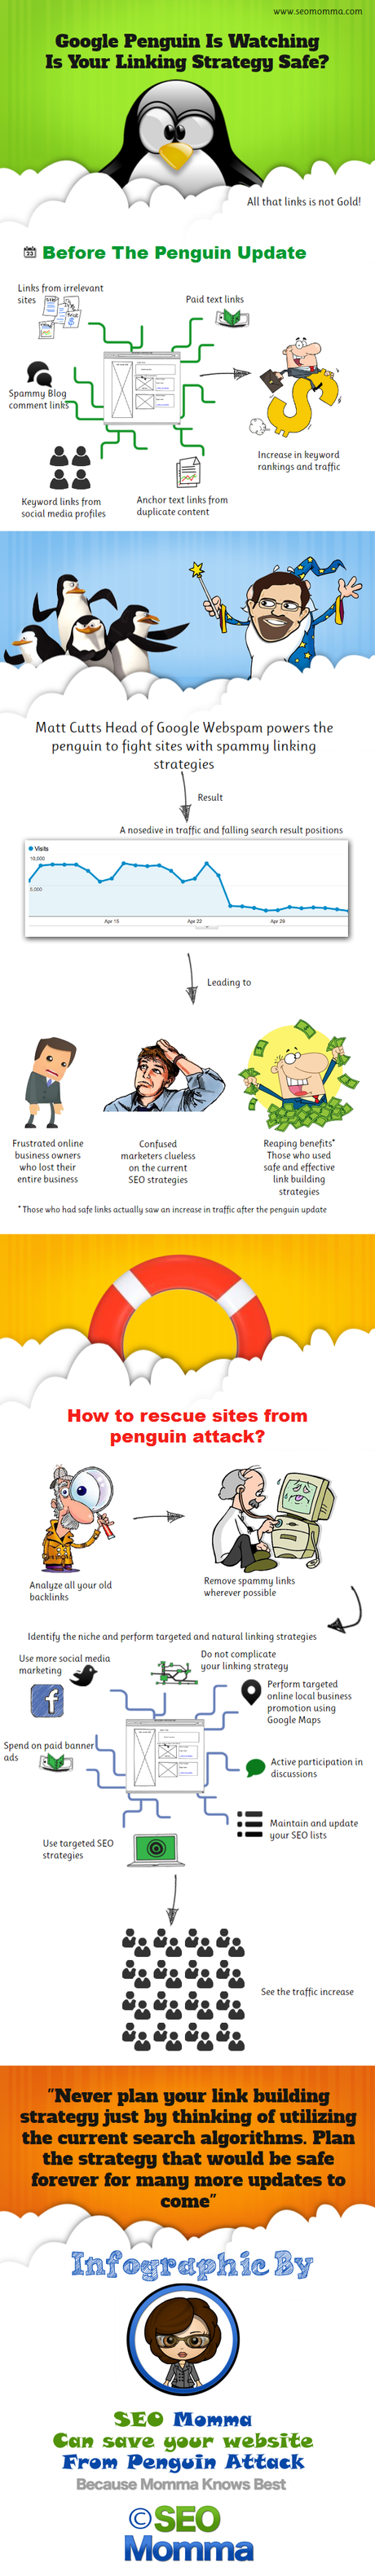 Infographic on the Google Penguin Update